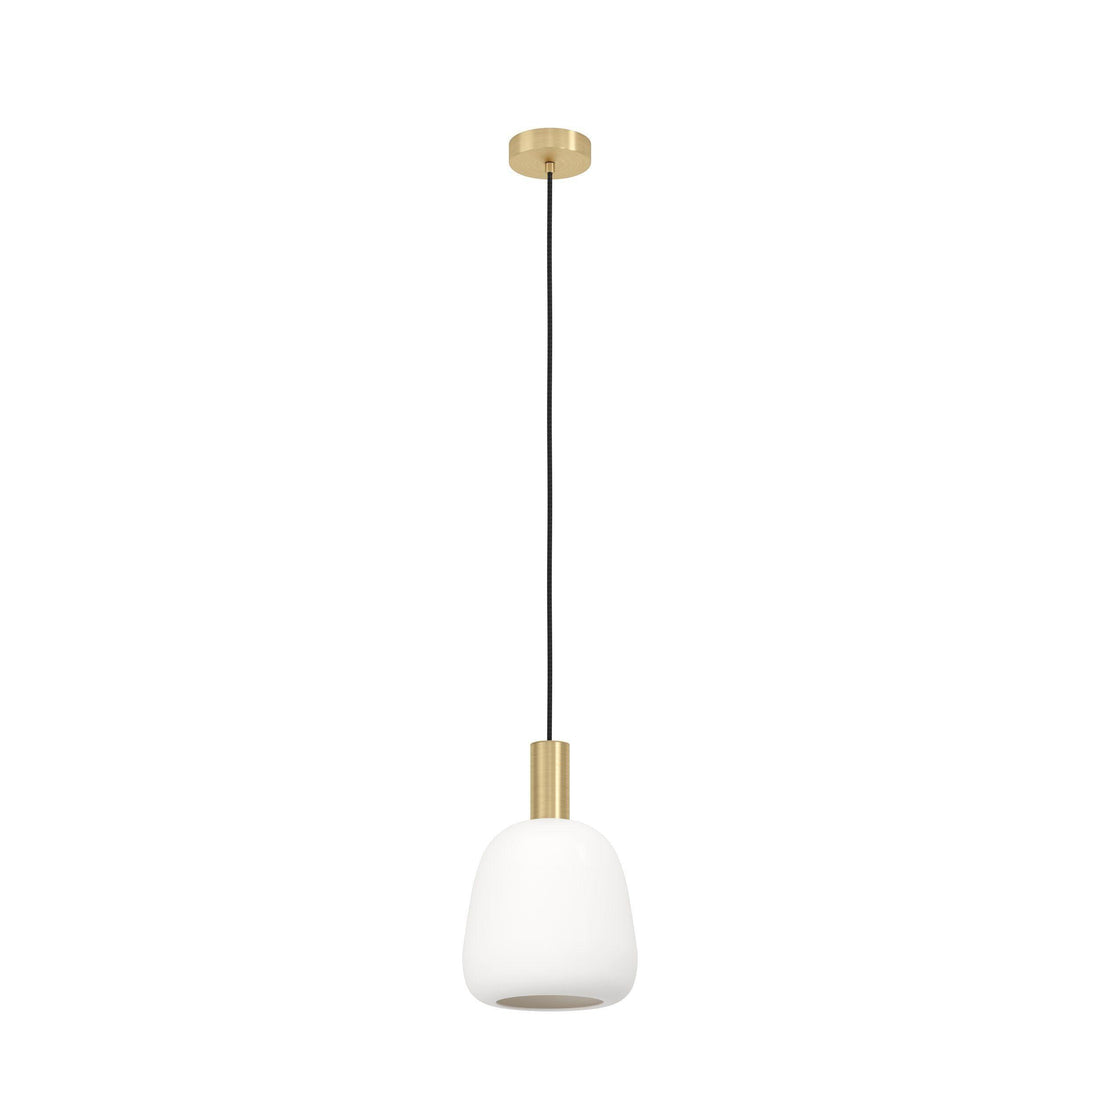 MANZANARES Pendant Light by The Light Library